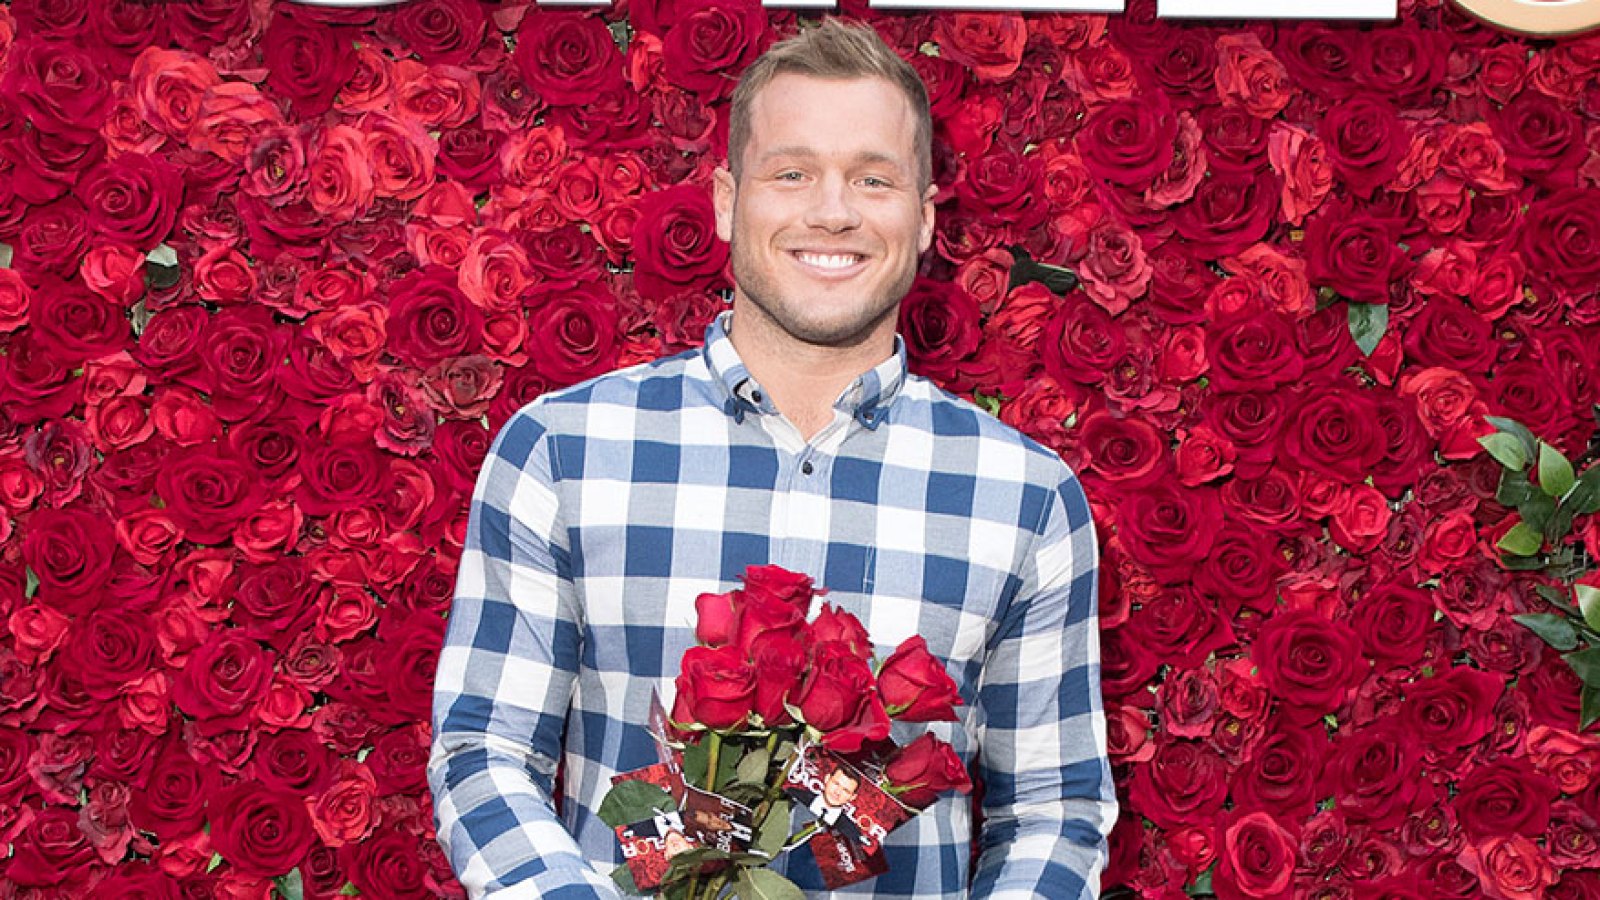 Who Does Colton Underwood Want to Be the Next Bachelorette